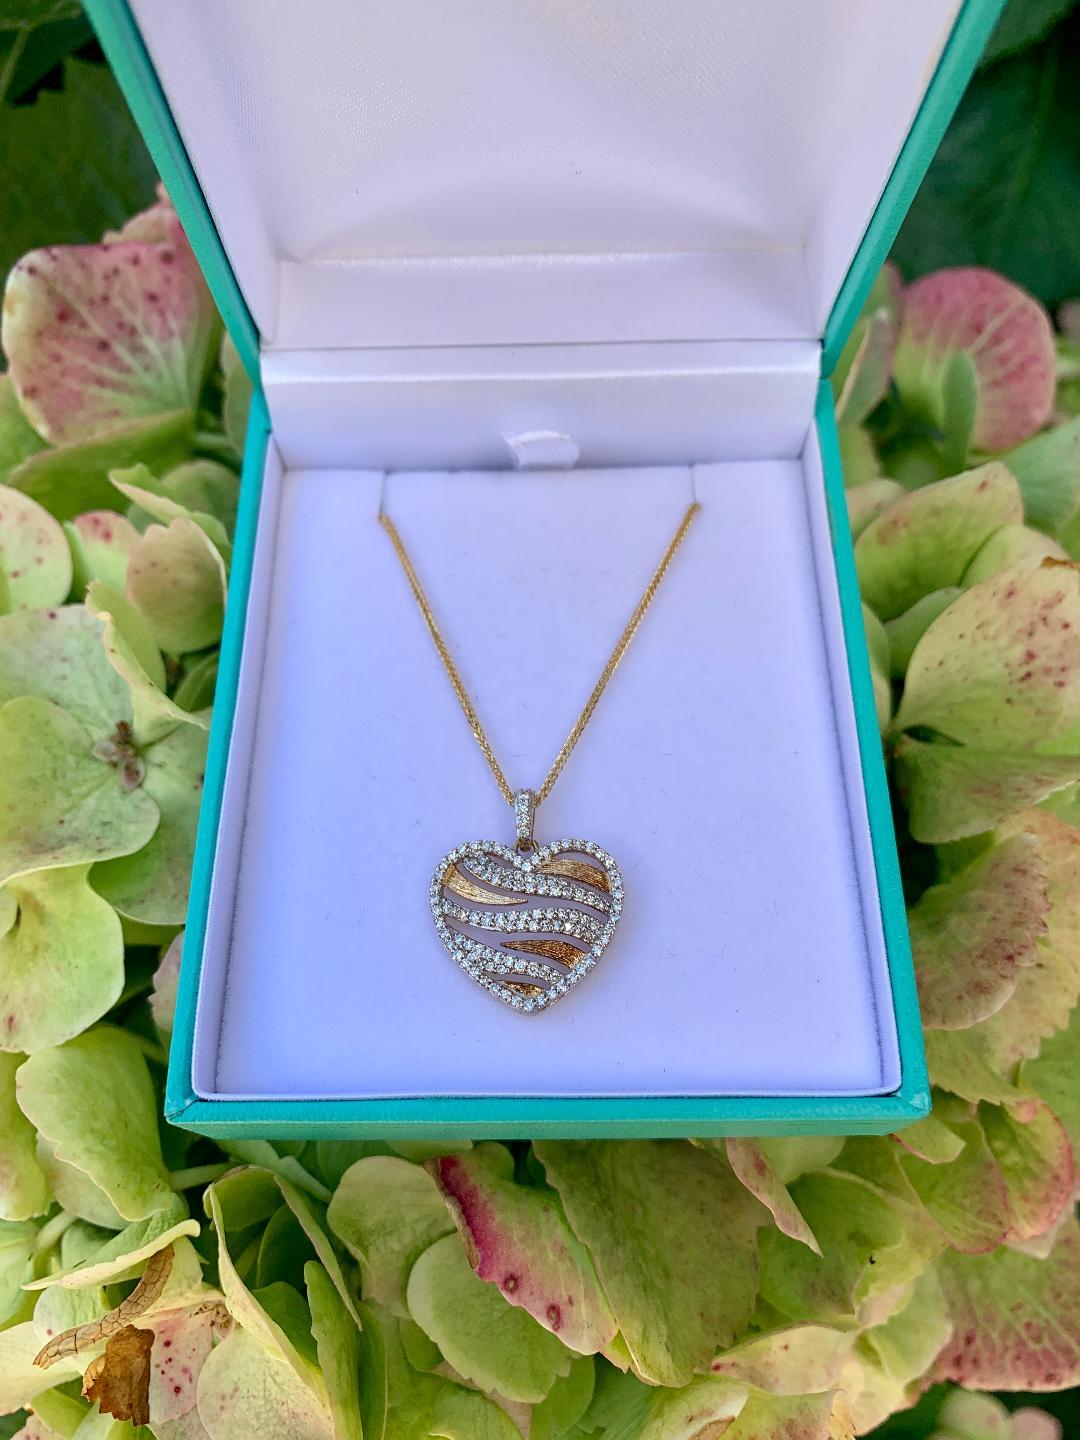 Very stylish, 14 karat yellow gold micro pave diamond heart pendant with diamond bale created in a fun and very fashionable zebra stripe design. Yellow gold stripes are a Florentine finish to create a rich contrast. Pendant features 108 round